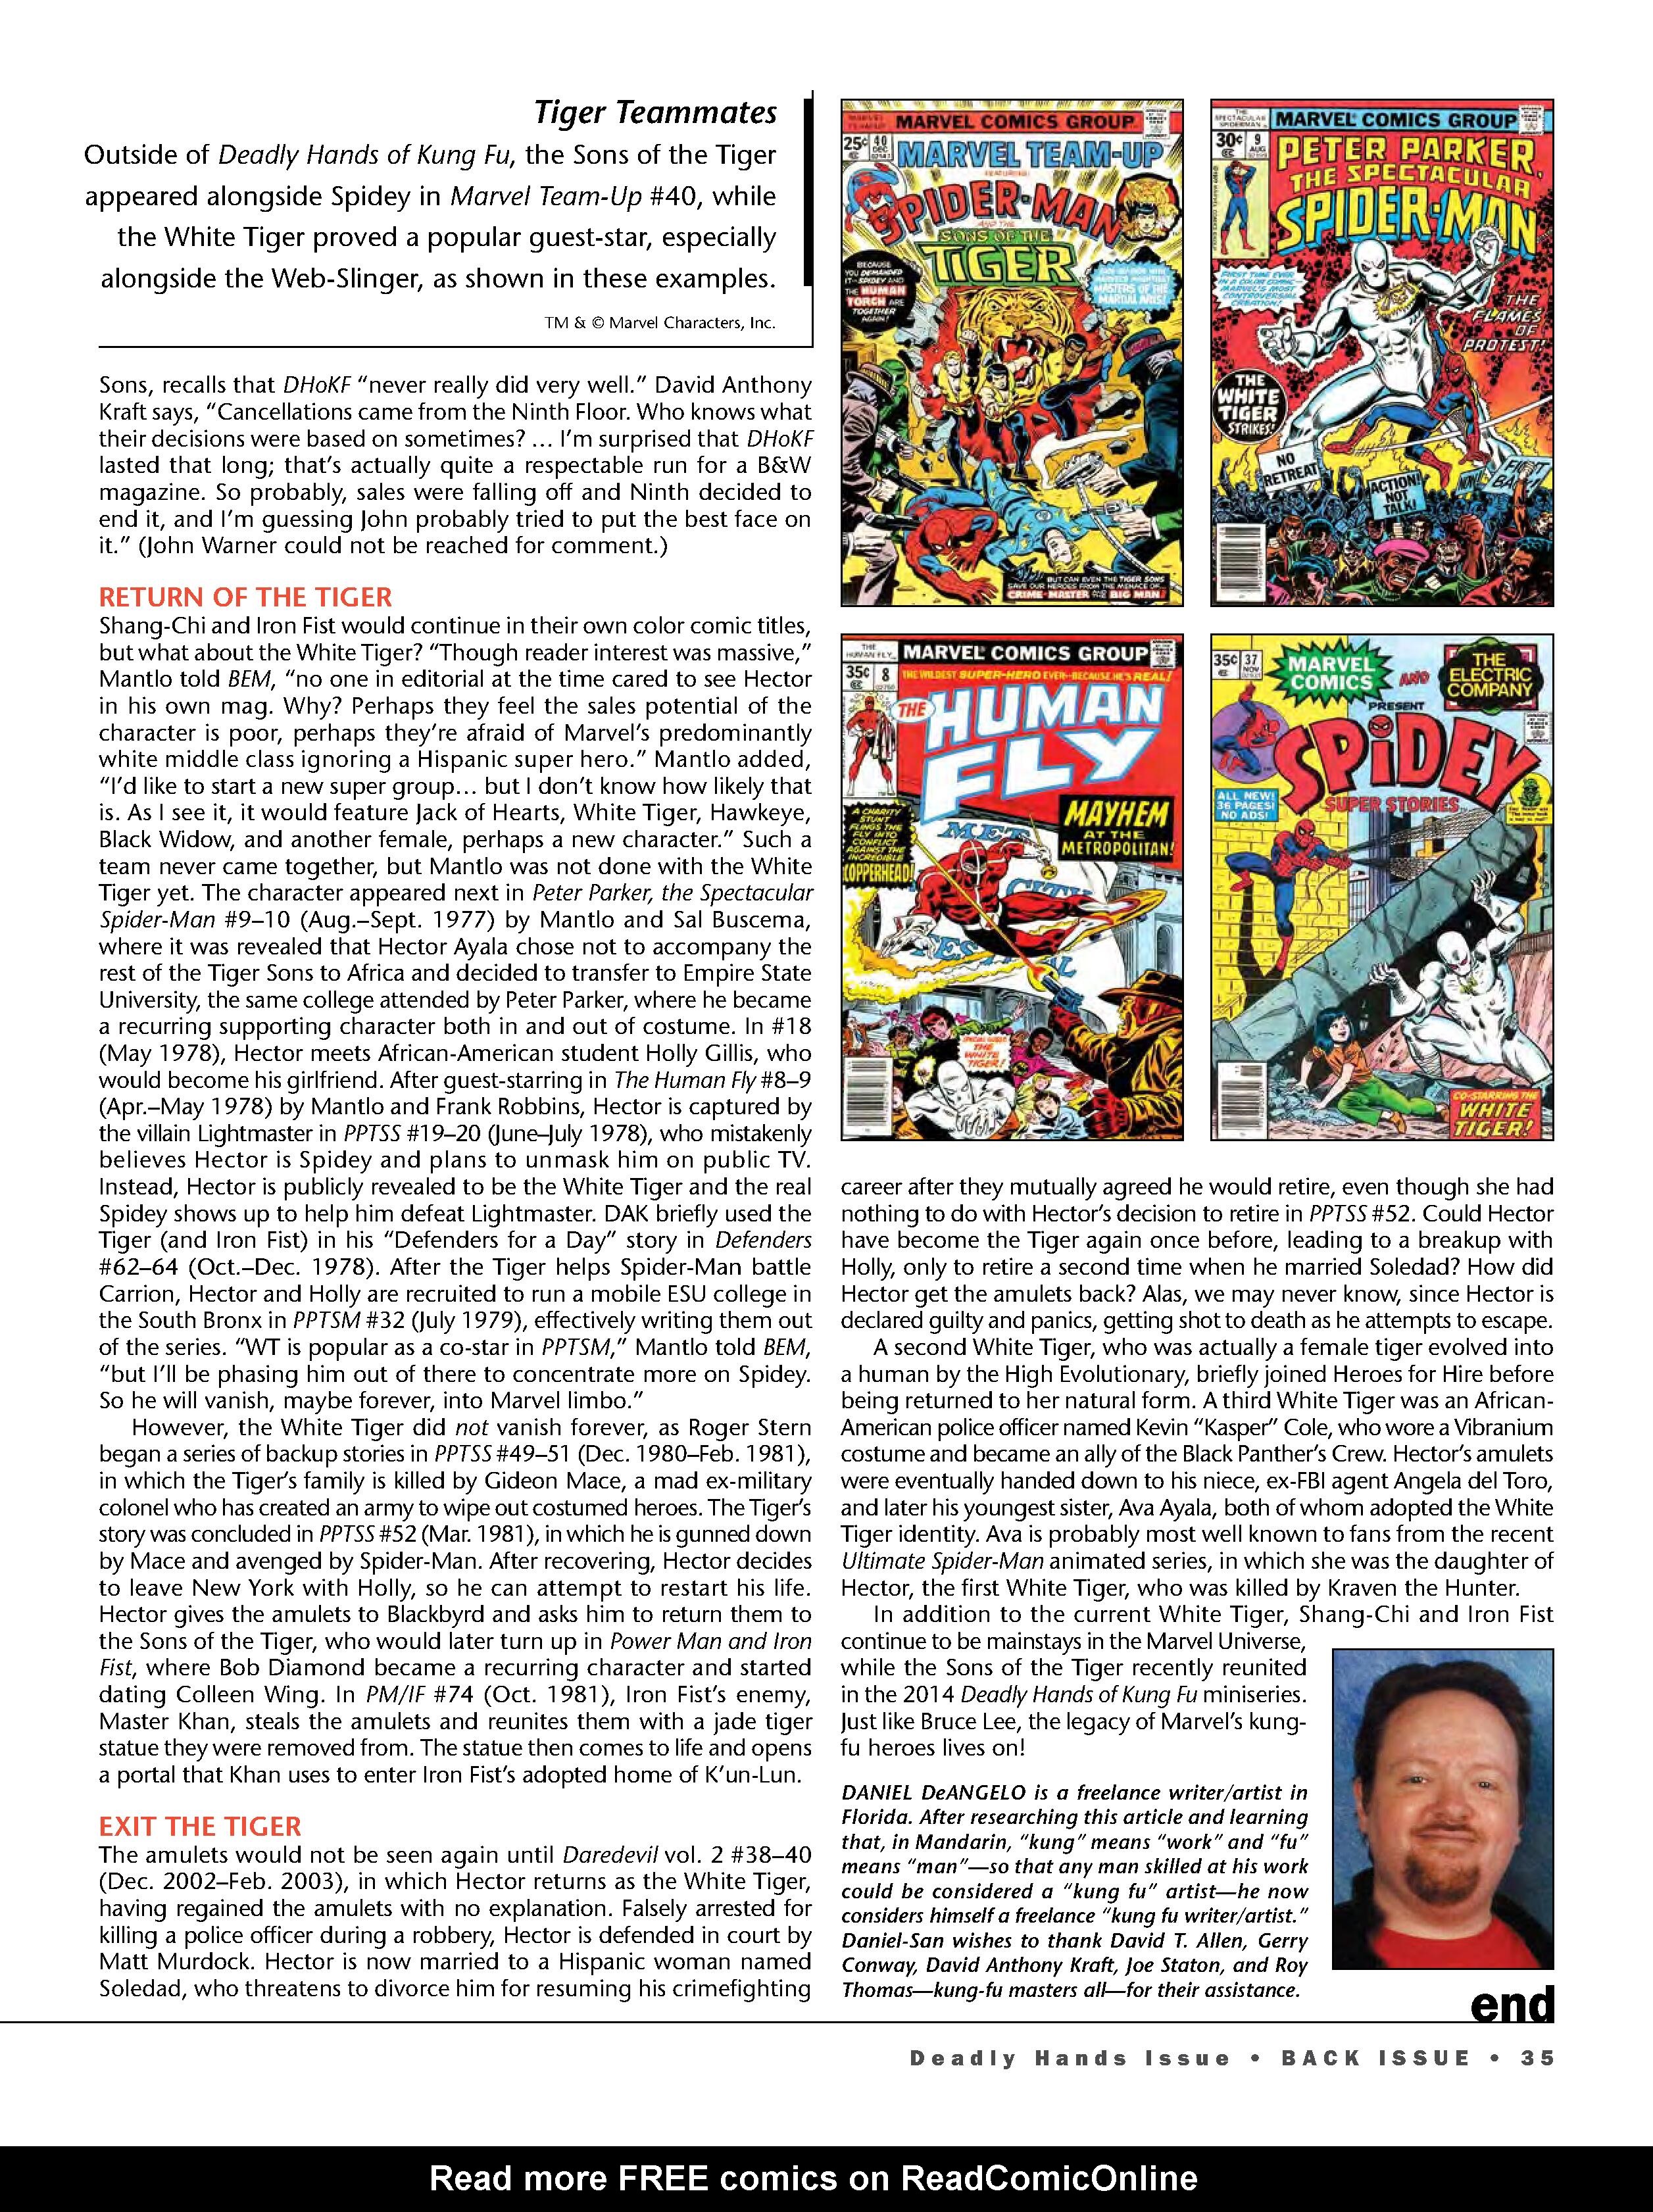 Read online Back Issue comic -  Issue #105 - 37